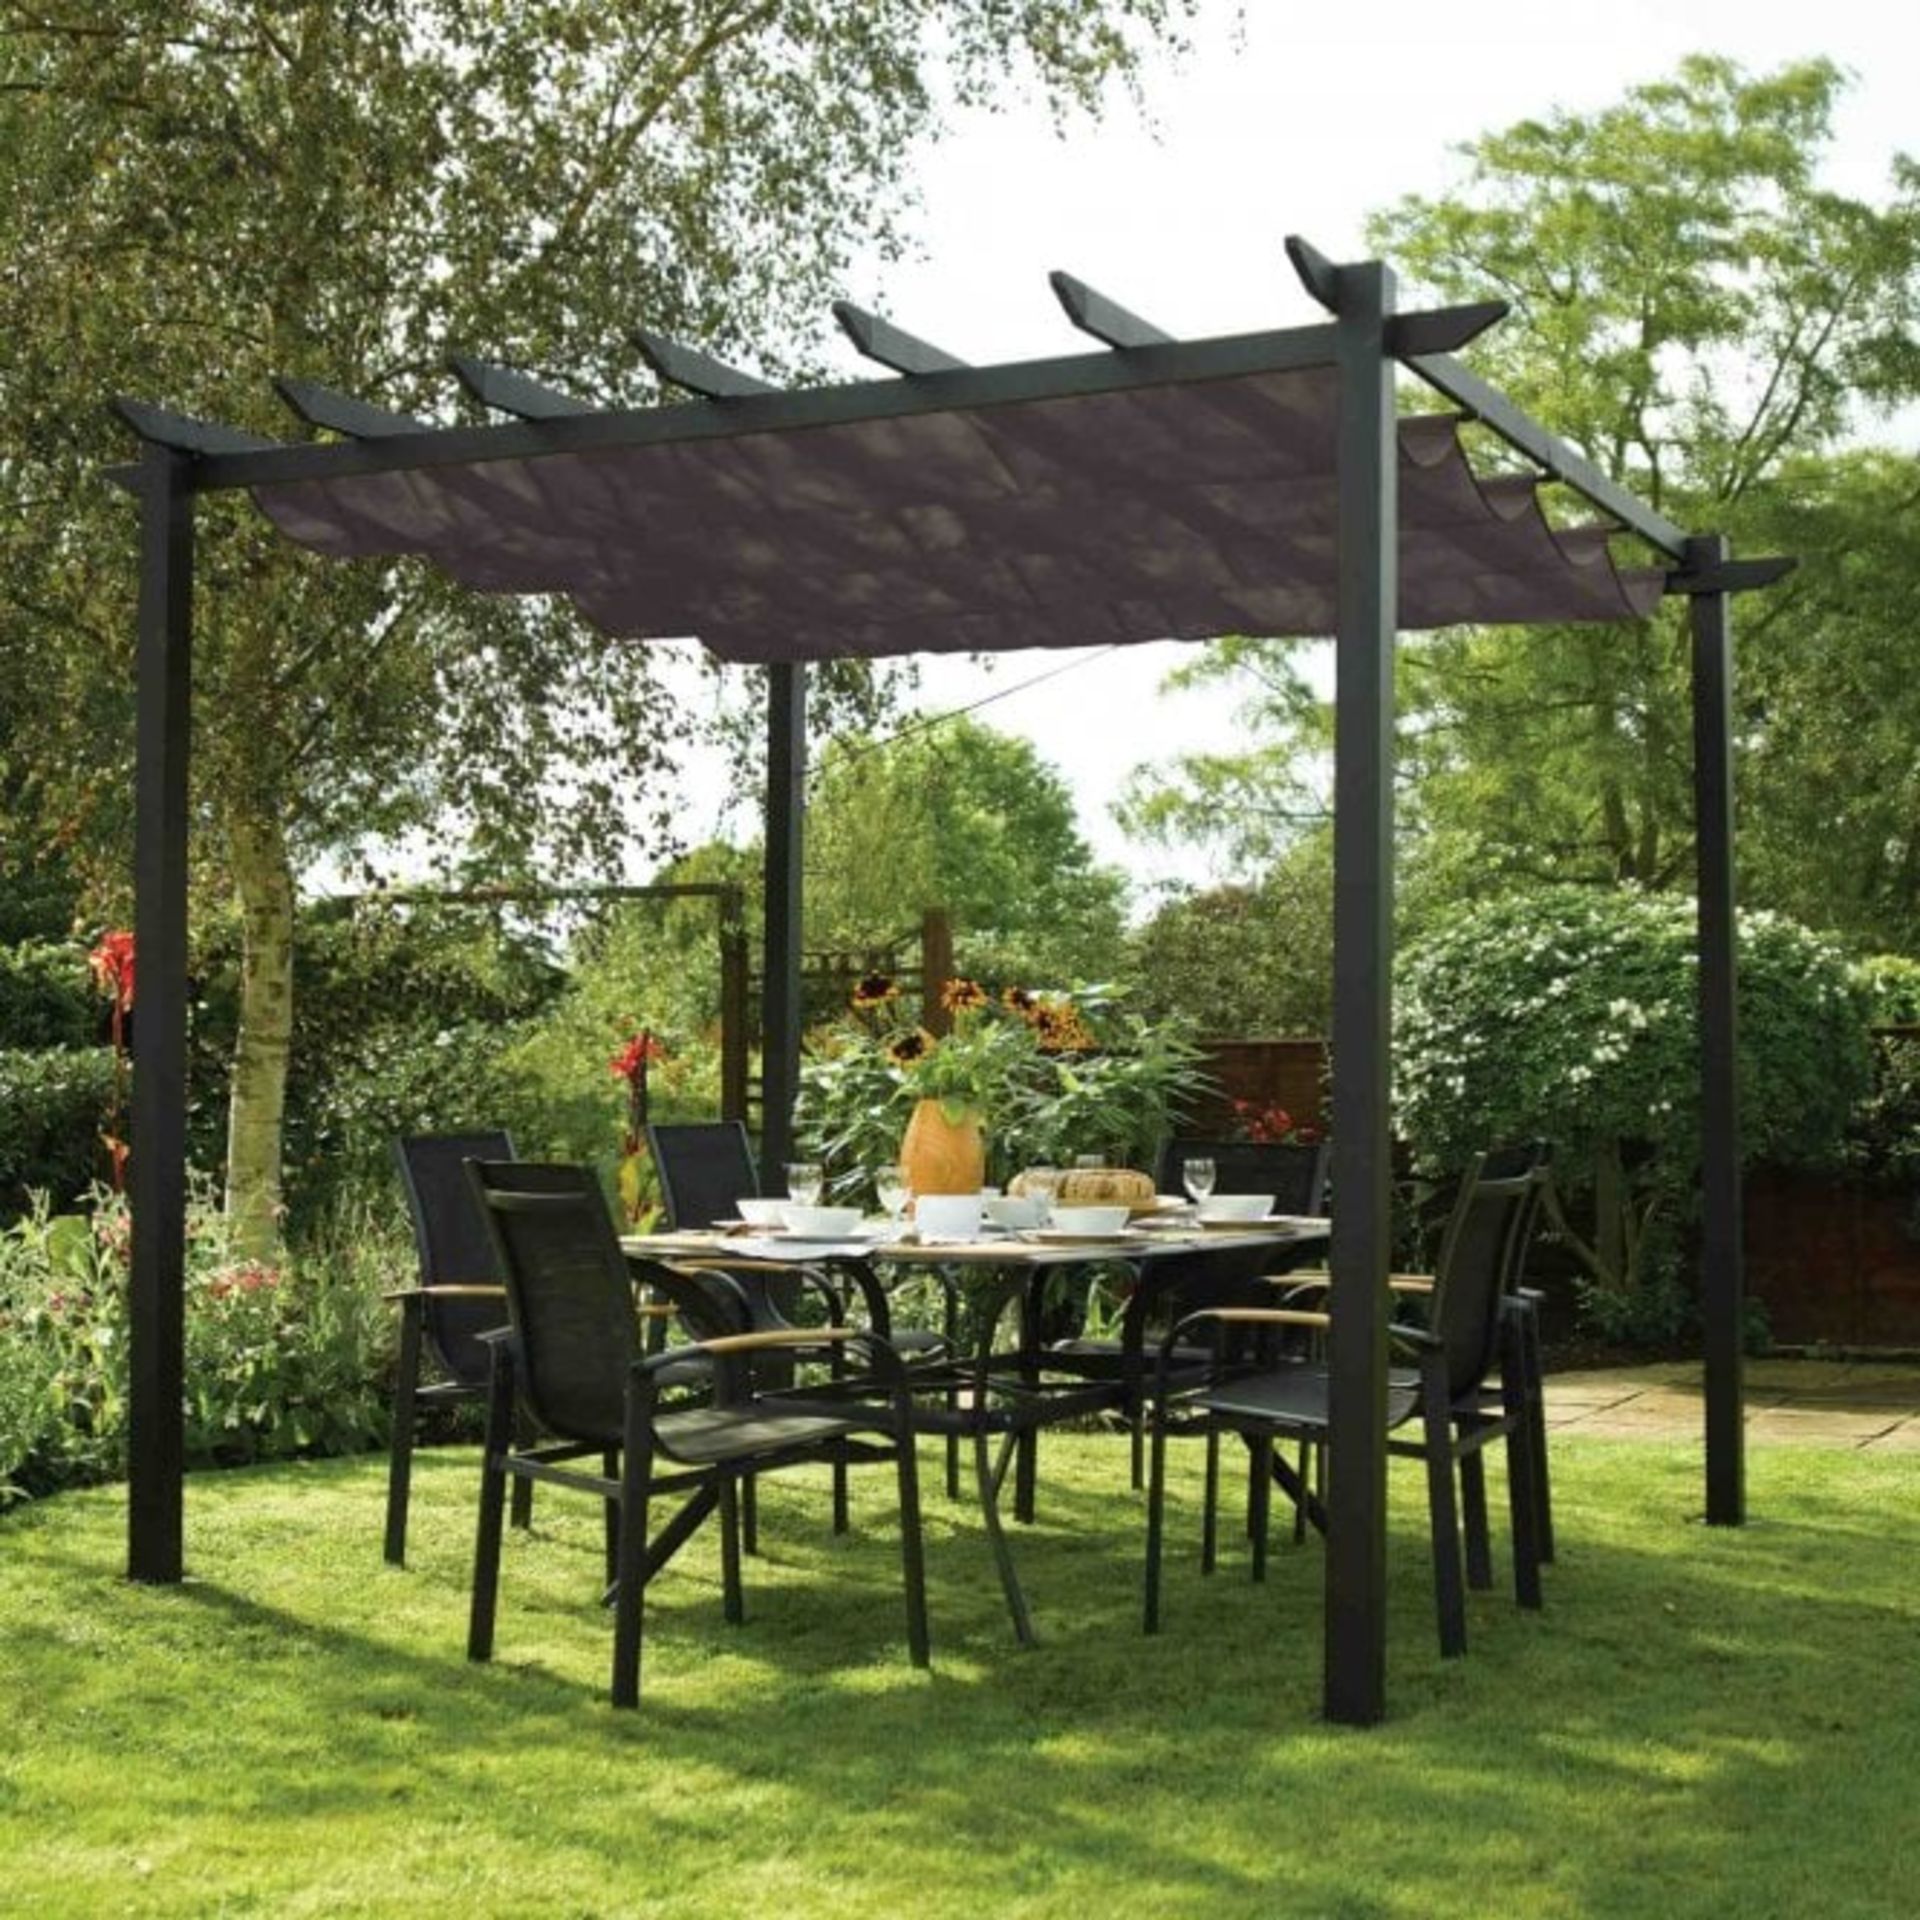 V Brand New 3m x 3m Aluminium Charcoal Grey Pergola With Zipped Cover - Sturdy Design And Folds Back